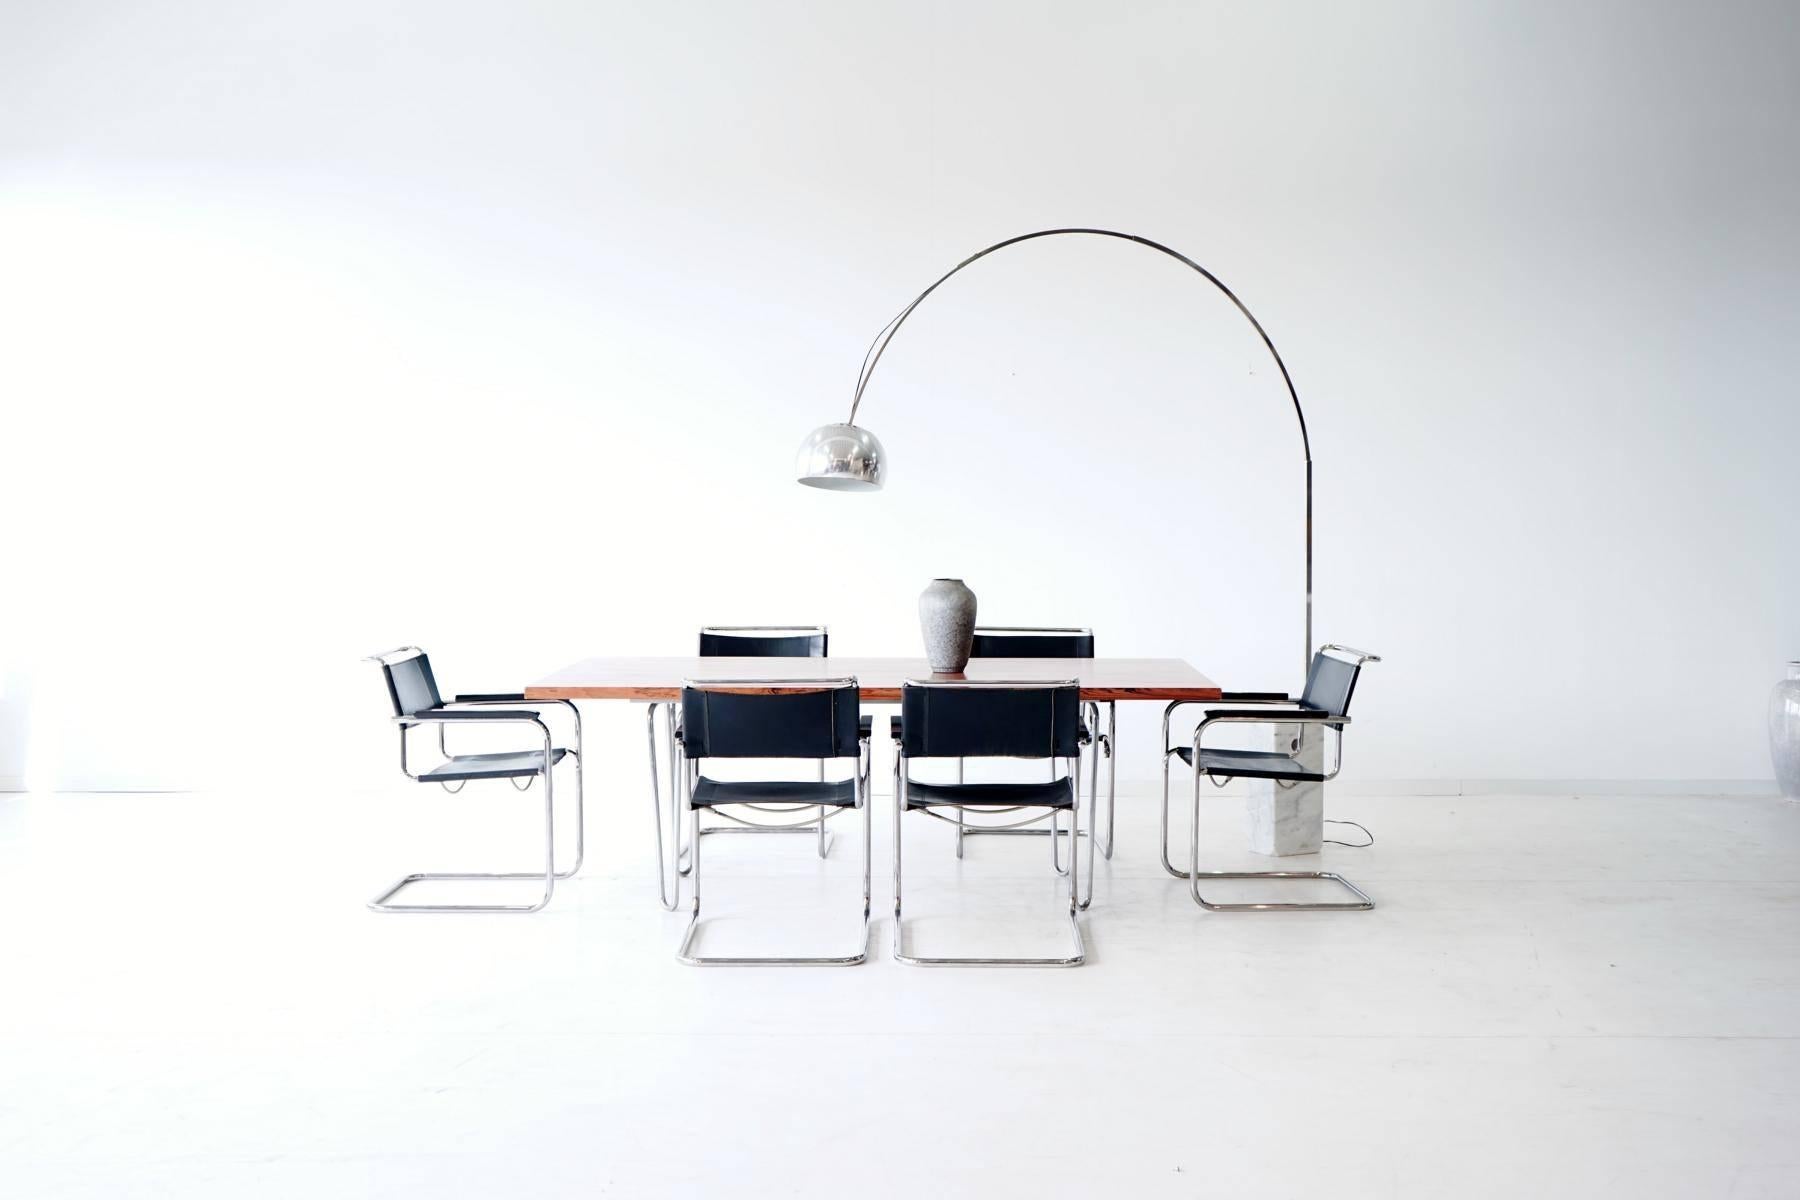 Set of six Thonet cantilever armchairs S34 by Mart Stam, 1927 Bauhaus
The comfortable cantilever armchairs S34 are suitable for visitors or conference room chairs or even as dining chairs. They are very high quality produced. The seat comfort is